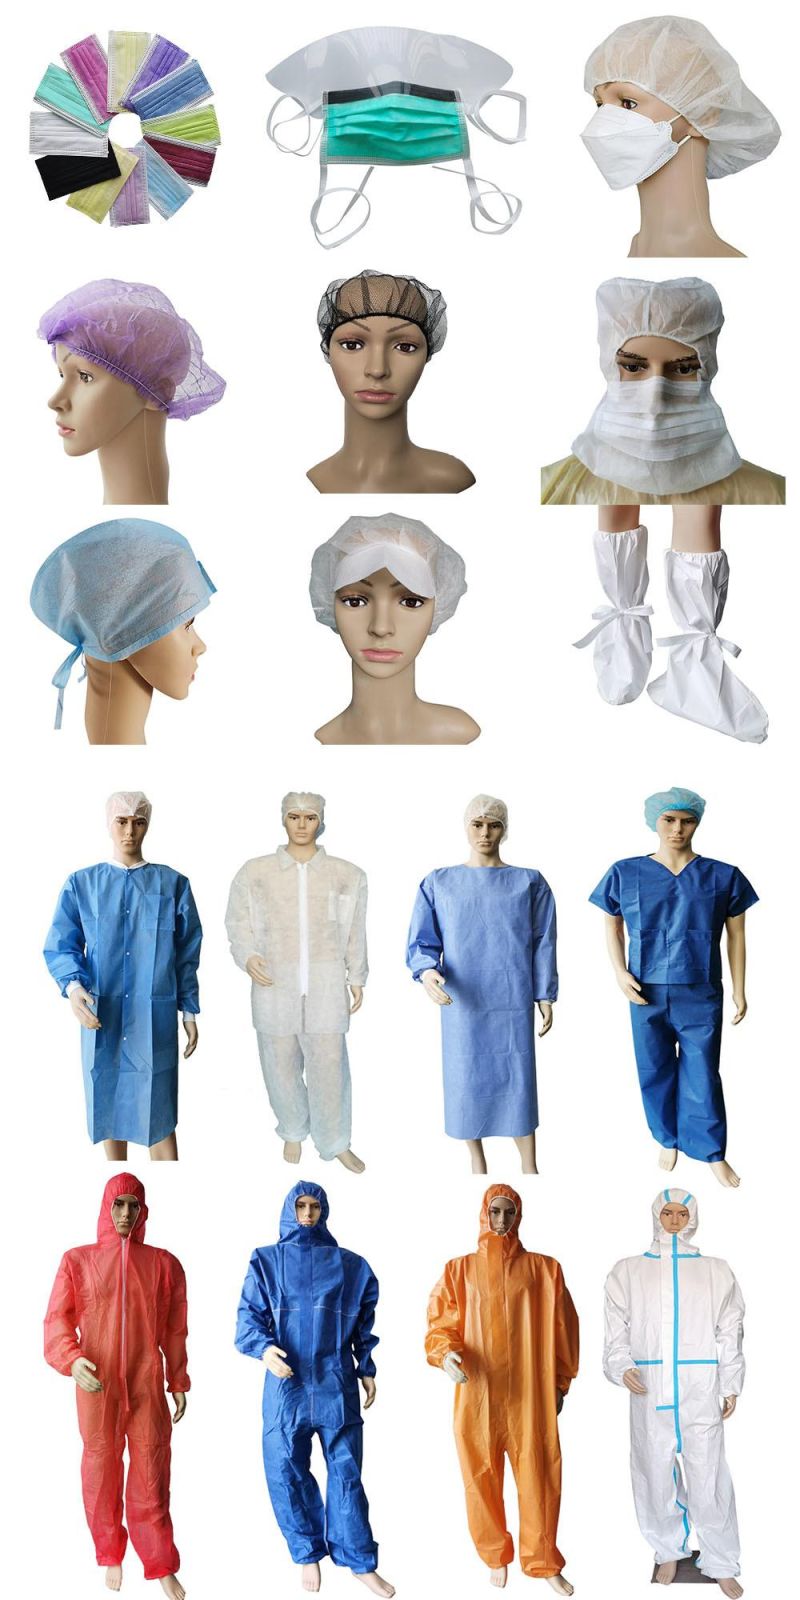 ISO CE FDA Certified Non-Woven Bar Shape Safety Food Processing Nursing Dust Free Workshop Surgery Clinic Disposable Pleated Caps